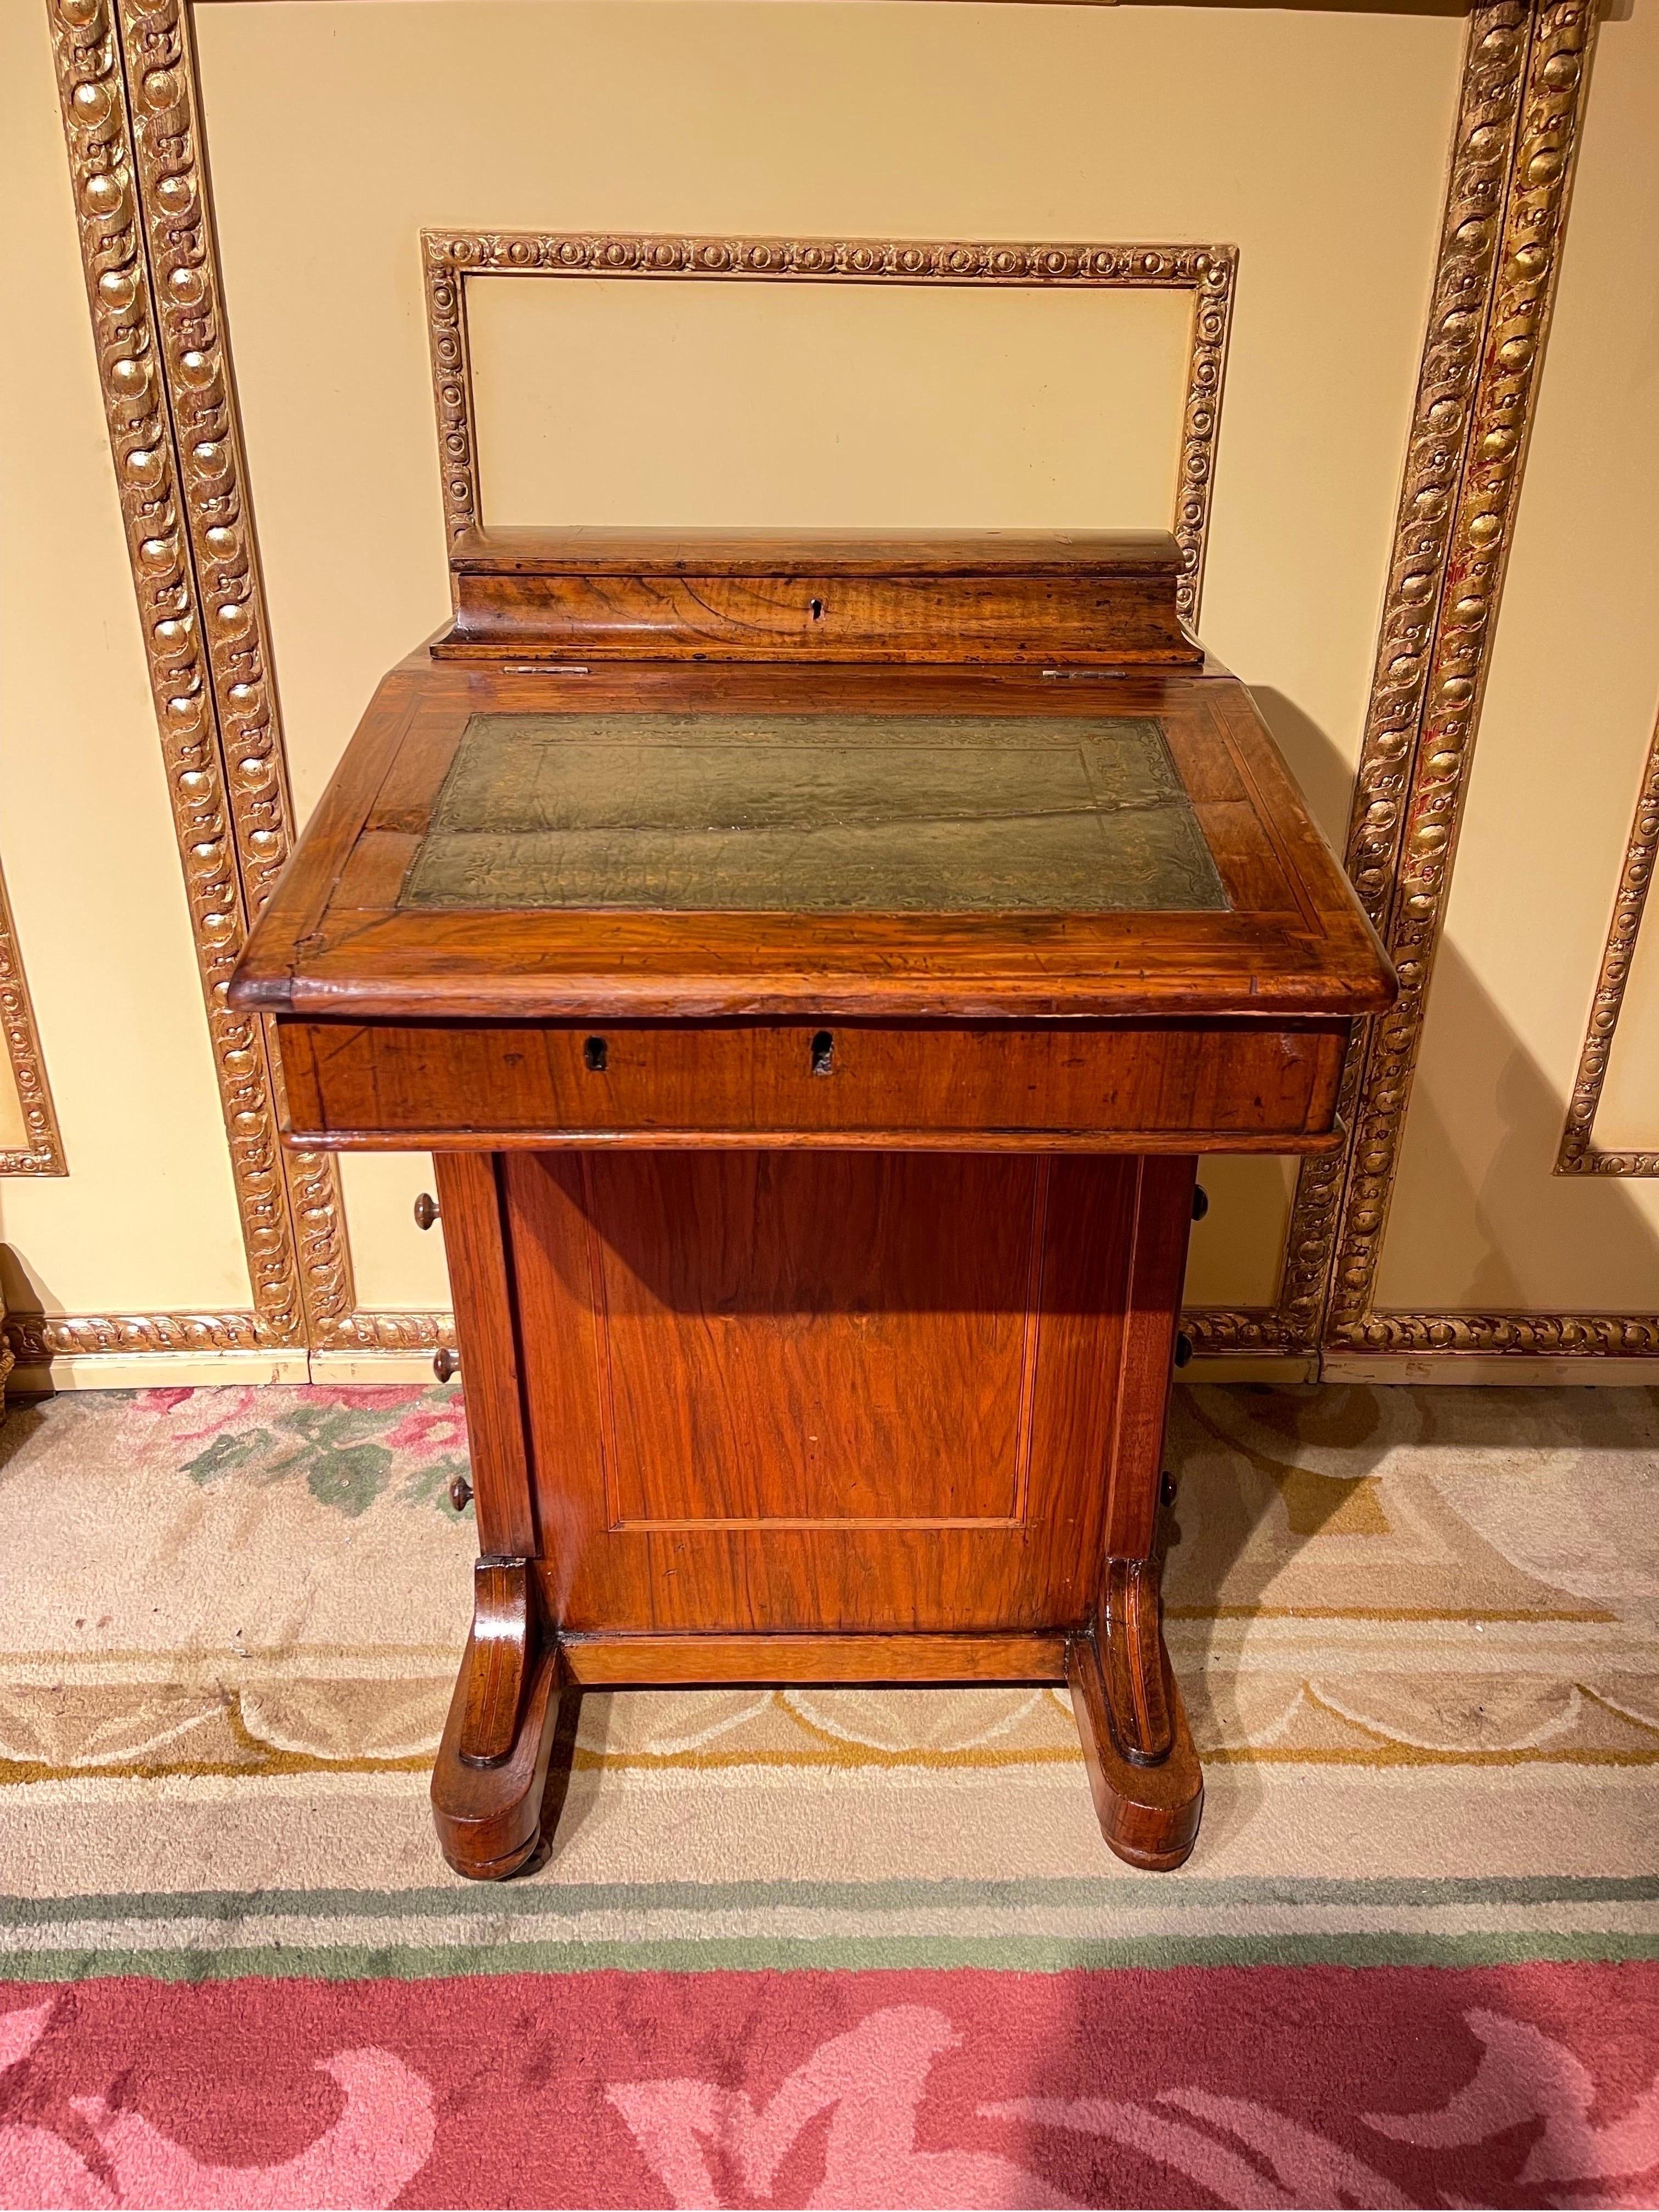 Unique mini desk/lady's desk, England 1890

Curious ladies desk, England. Folding writing surface made of solid wood.
With various drawers and compartments for sufficient storage space.